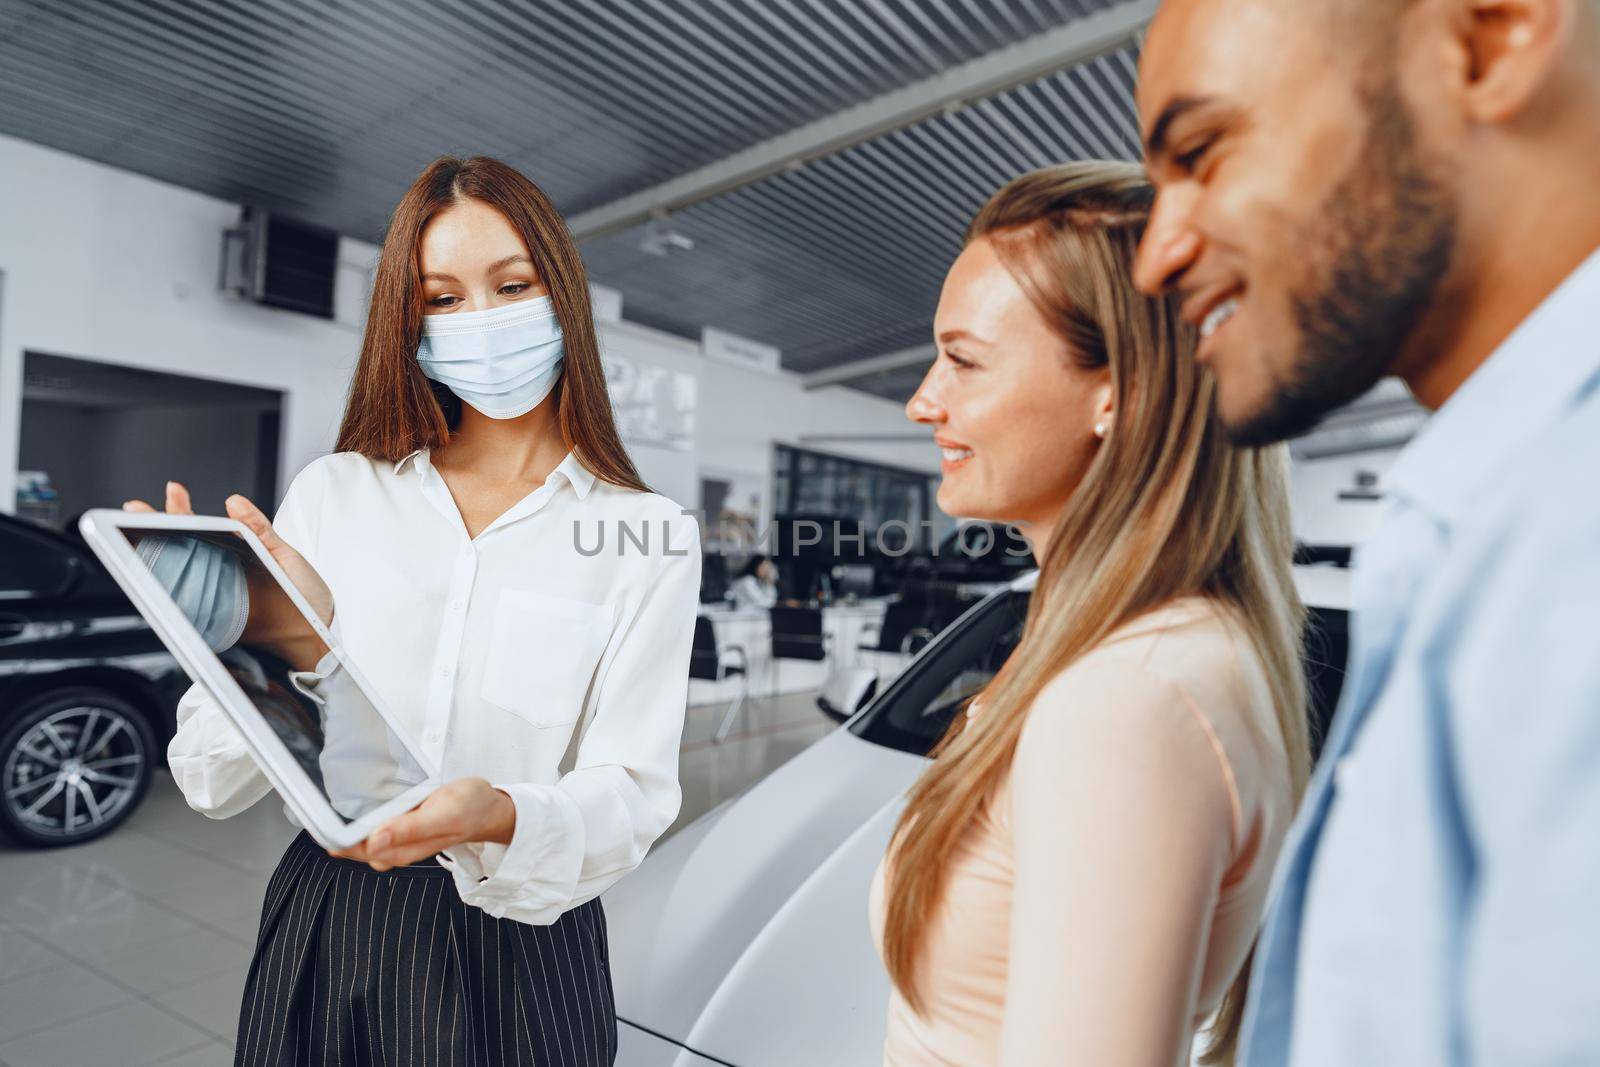 Car saleswoman wearing medical mask shows buyers couple something on digital tablet. .New pandemic job requirements concept